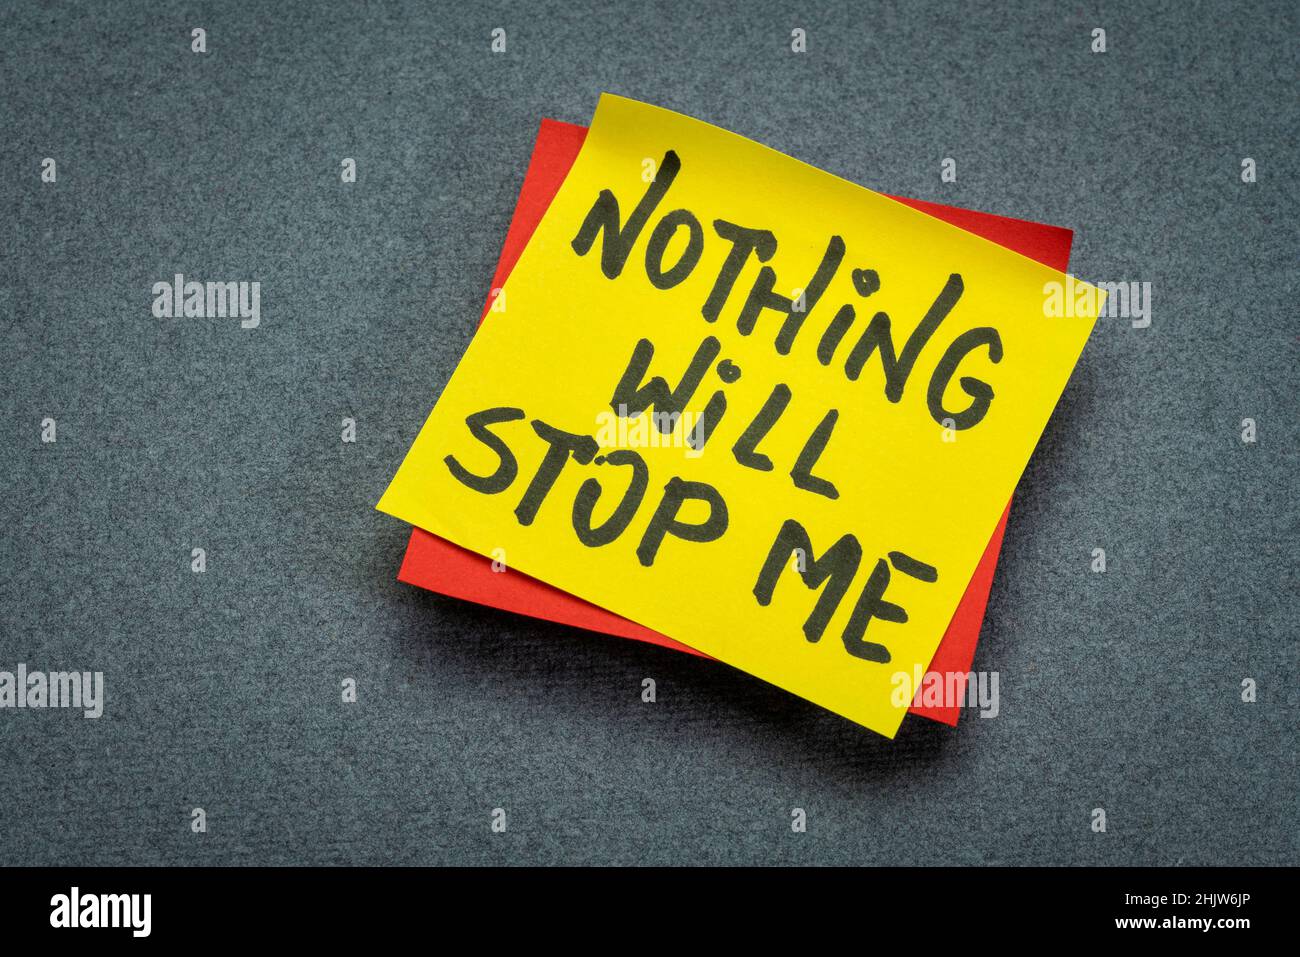 Nothing will stop me - motivational handwriting on a reminder note, positive affirmation and determination concept Stock Photo